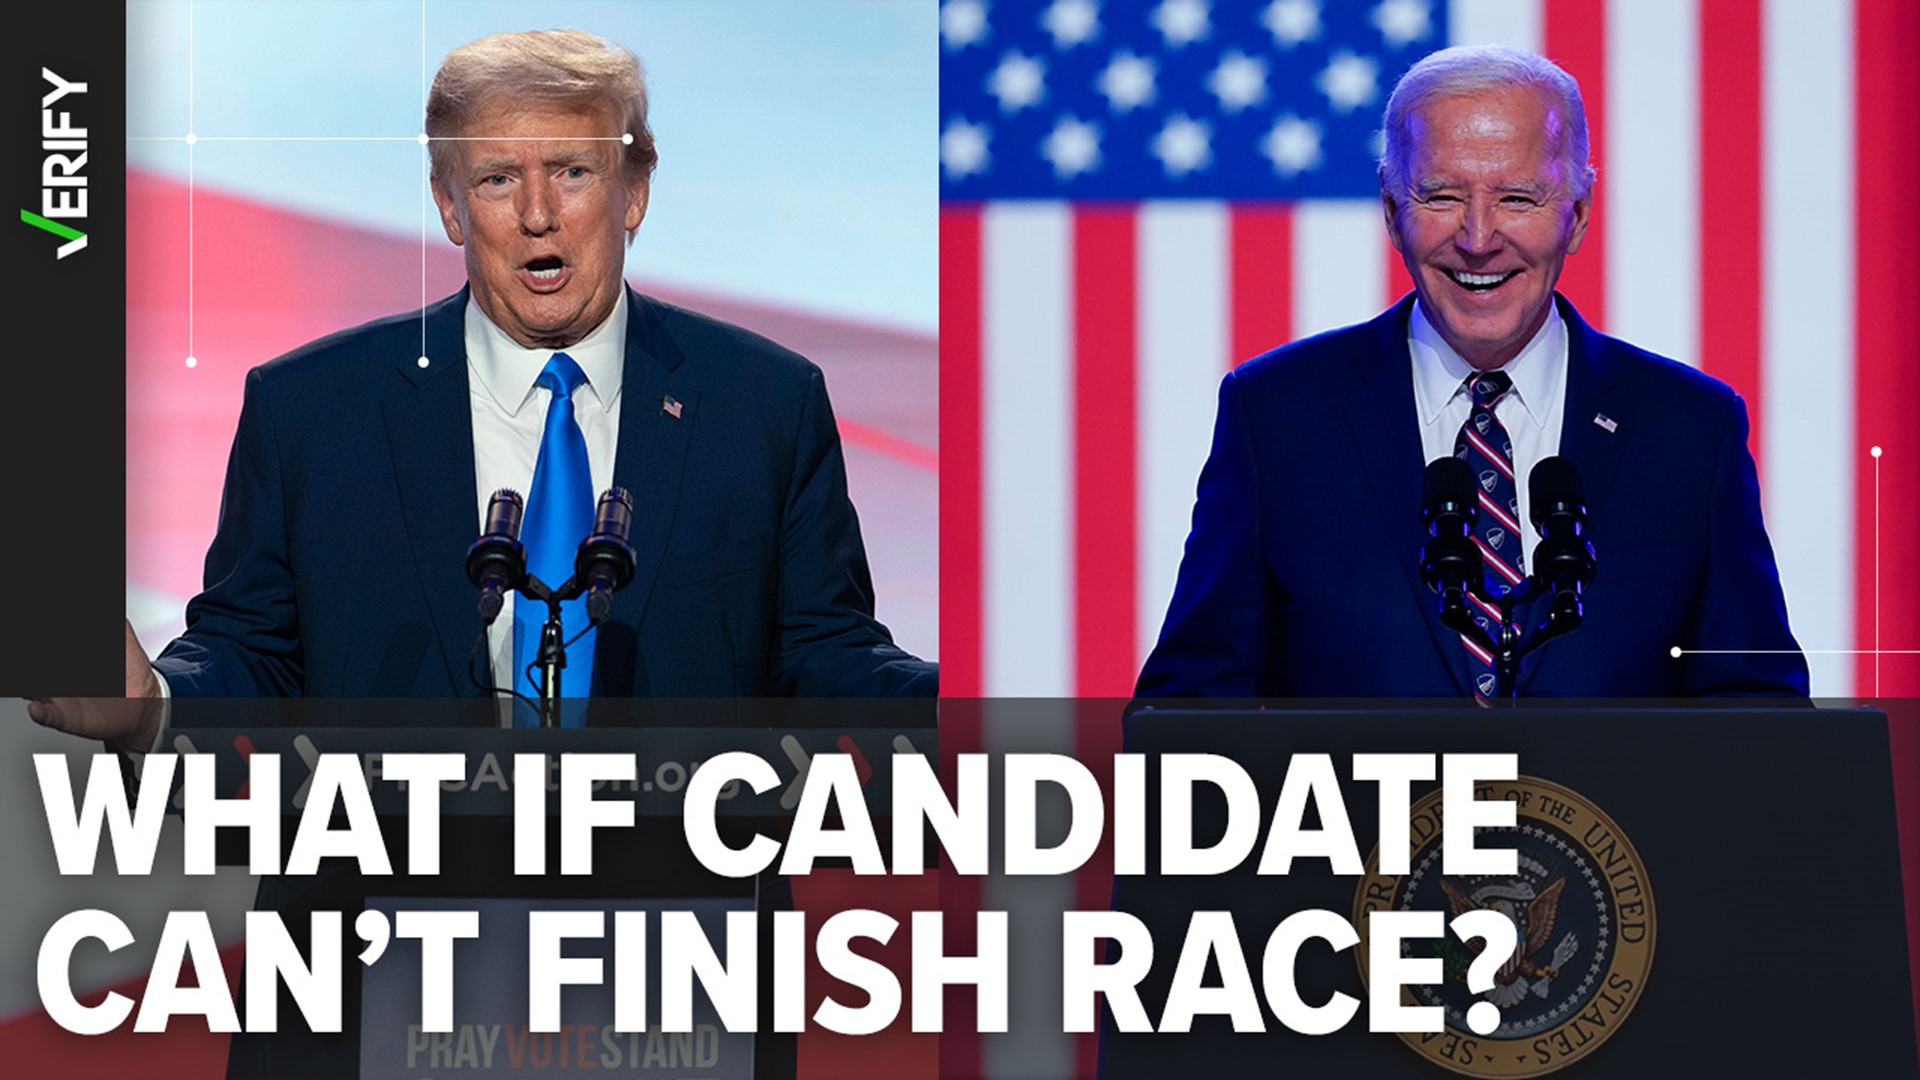 Right now the leading candidates for president in both parties...are older than 75. So what happens if they die mid-campaign... or their age forces them to drop out?